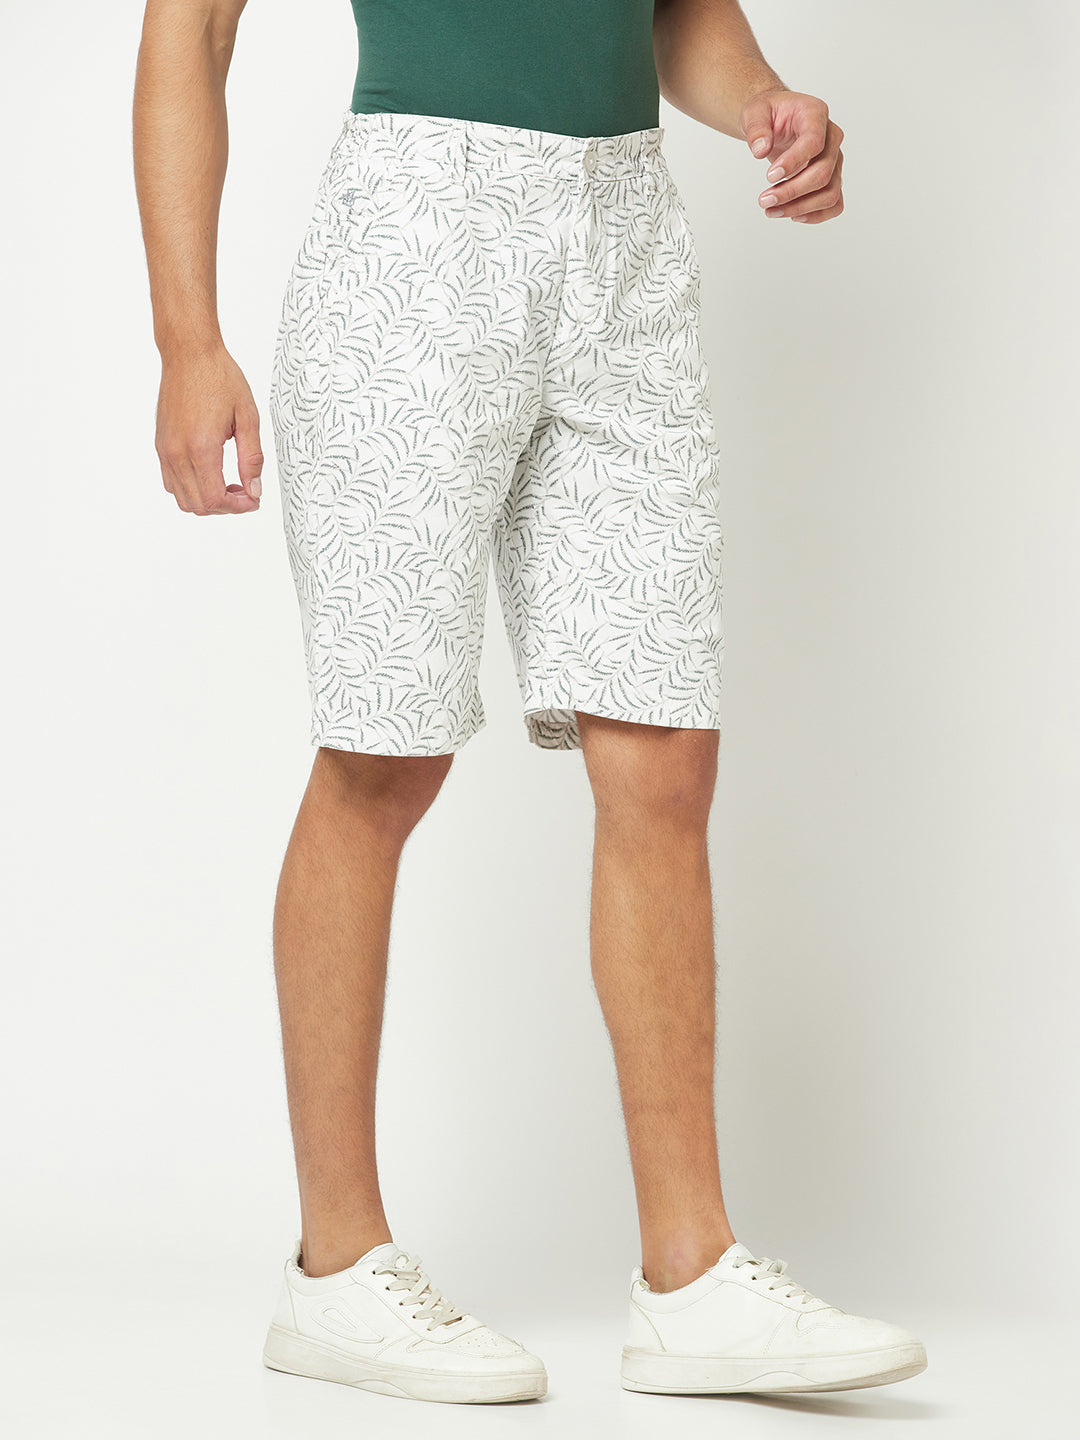 Casual White Floral Shorts 